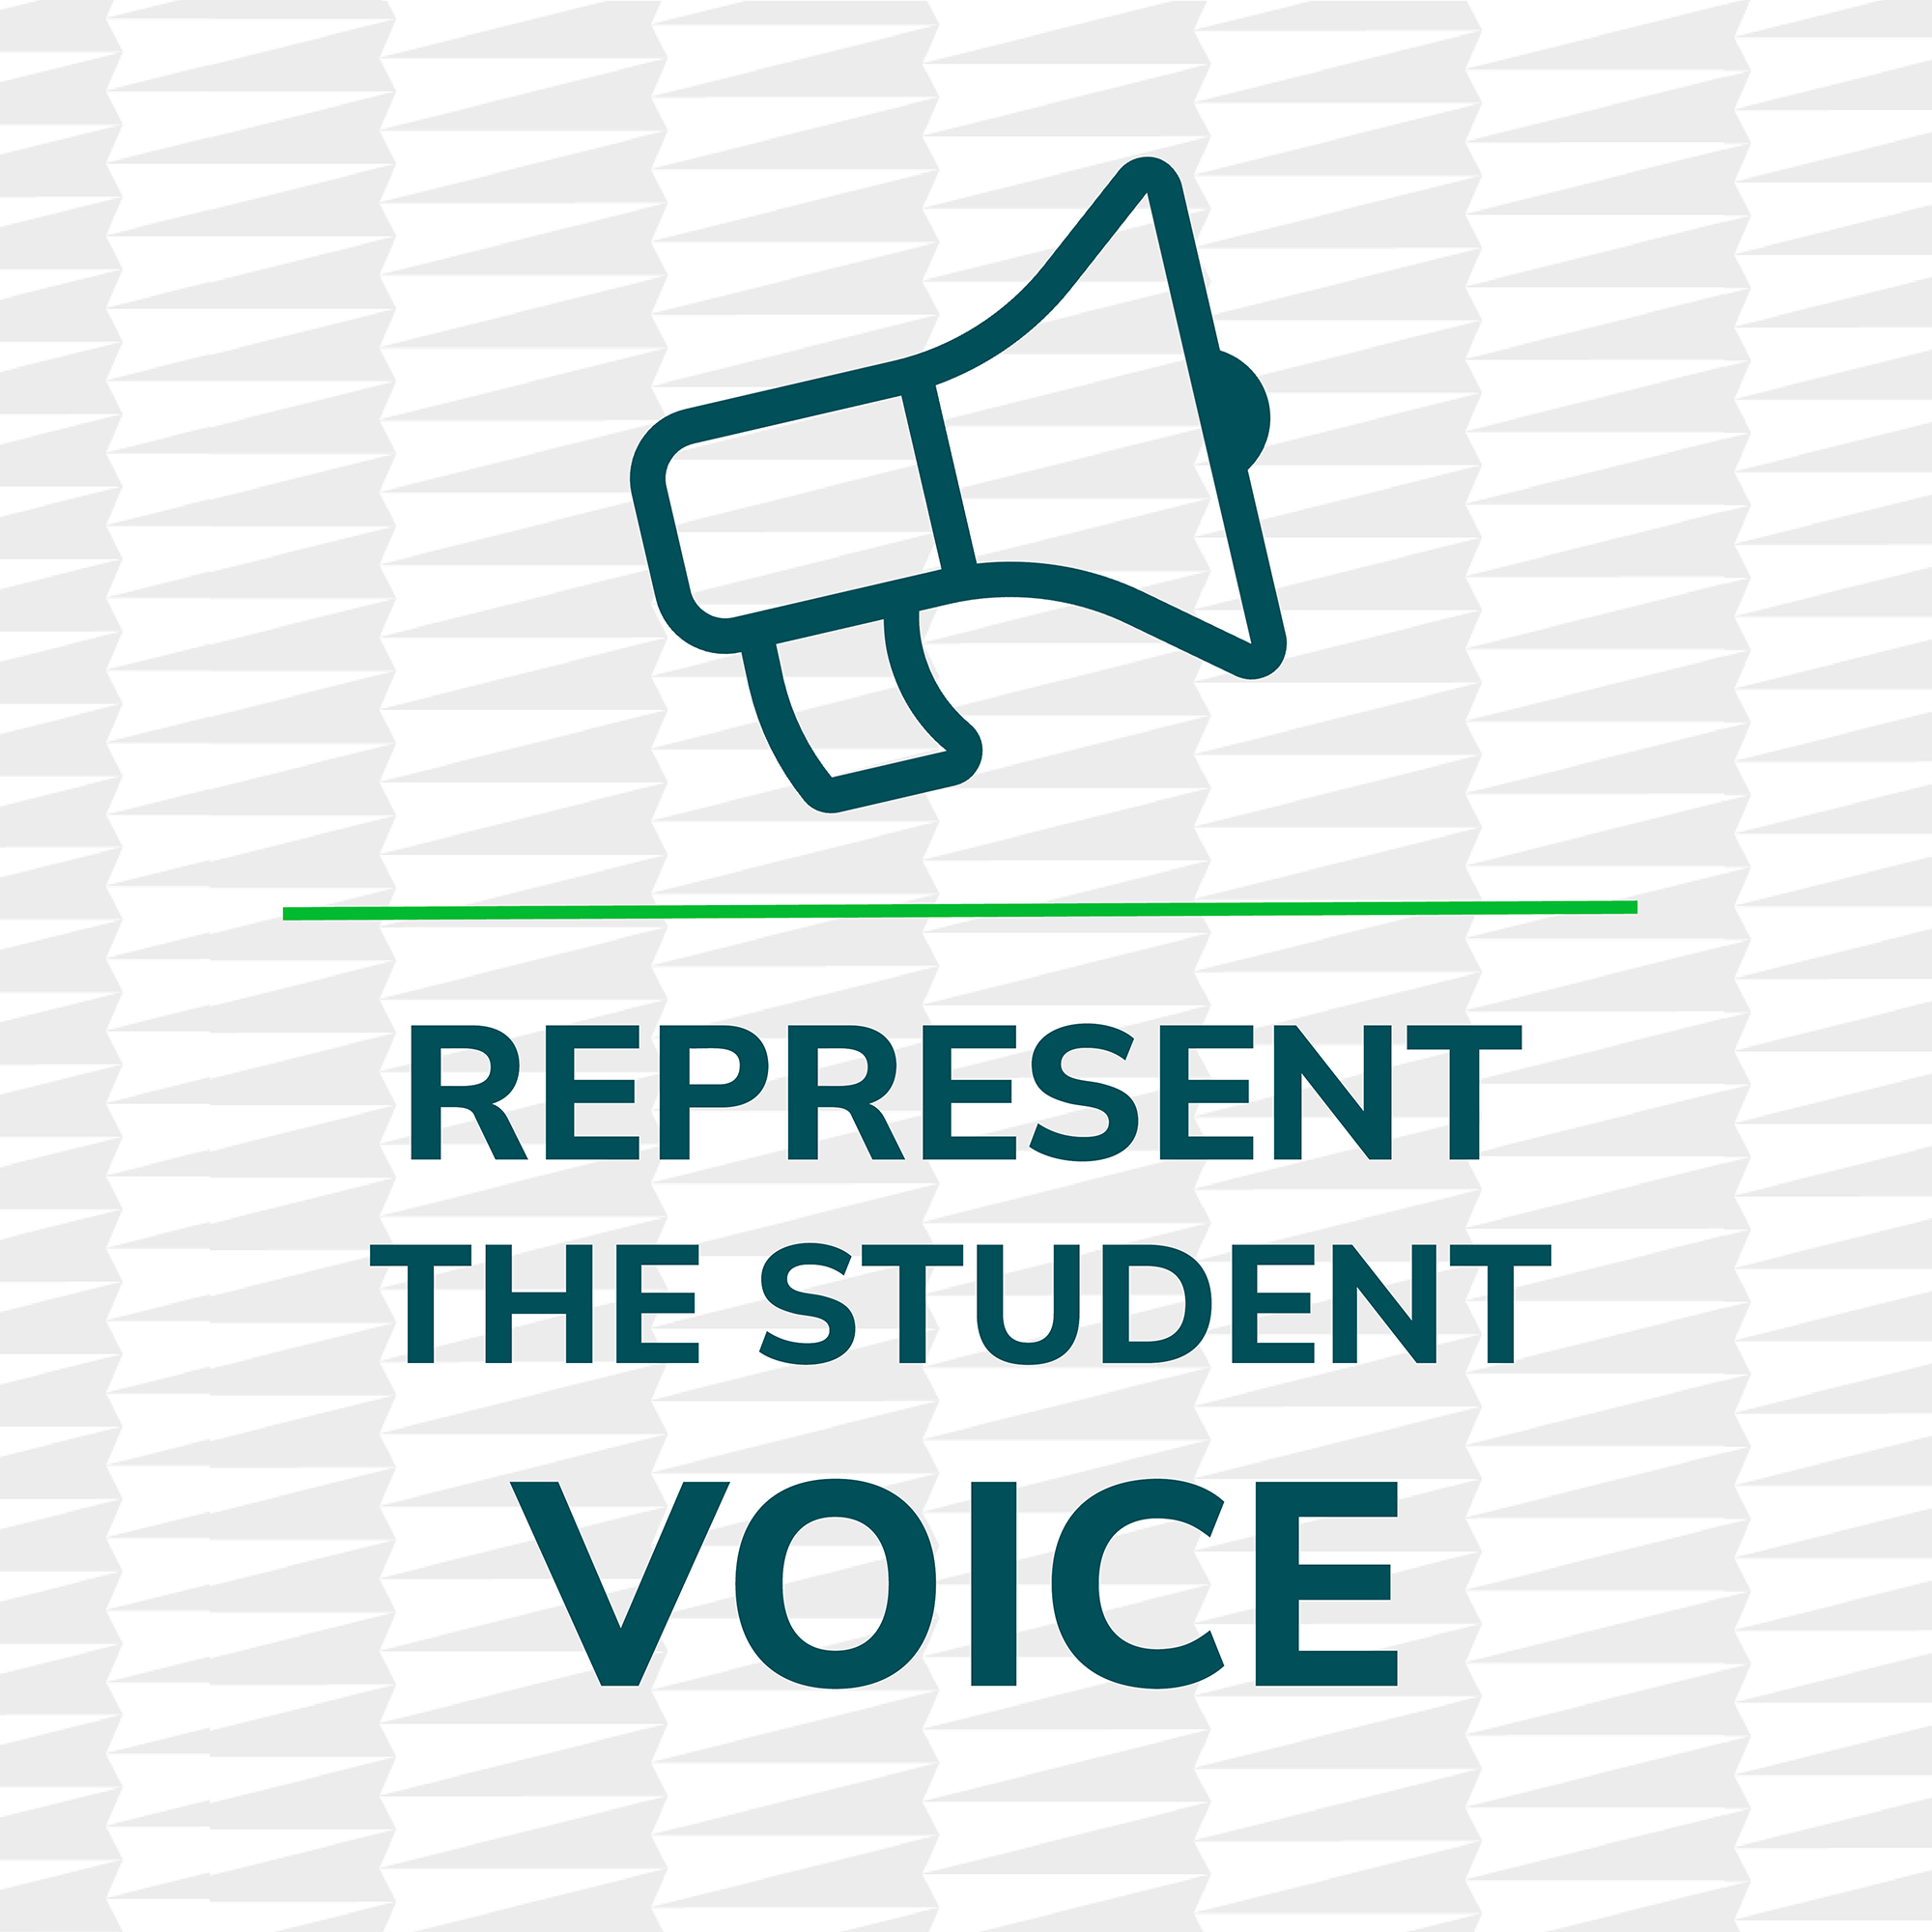 The words "Represent the Student Voice" accompany a megaphone icon in a graphic.